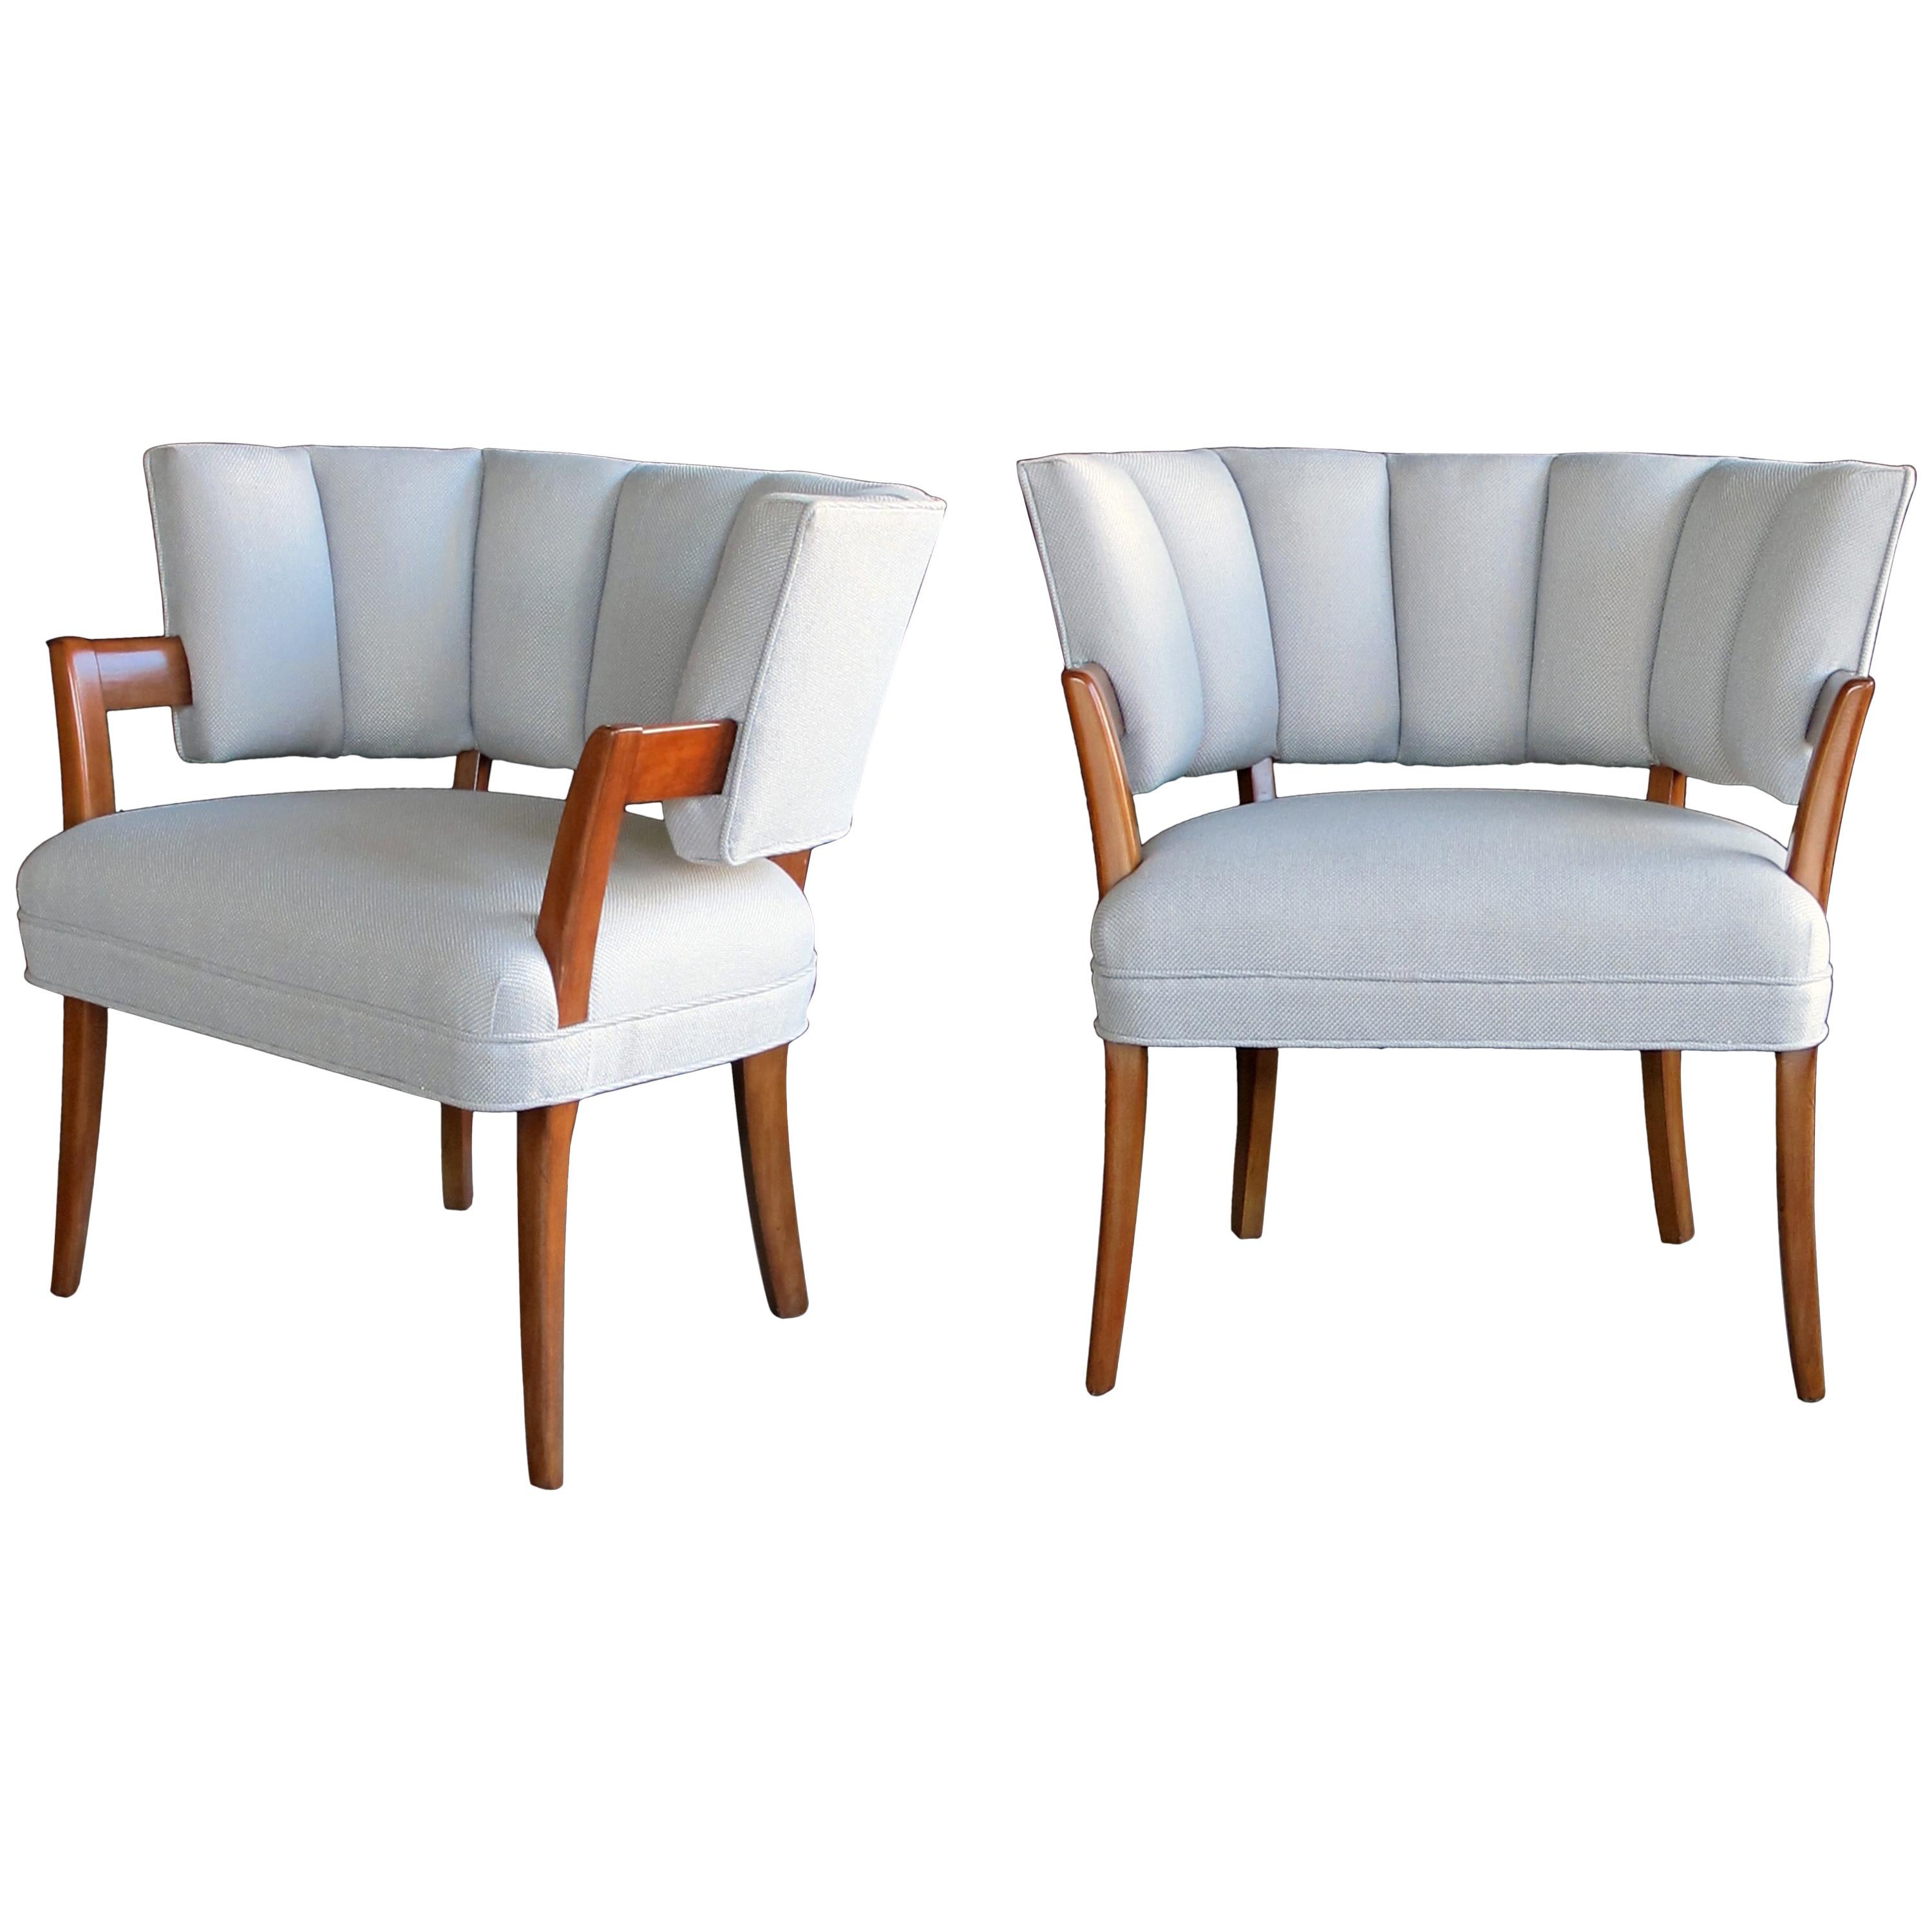 Rare and Iconic Pair of American Art Deco Armchairs by Eugene Schoen, New York